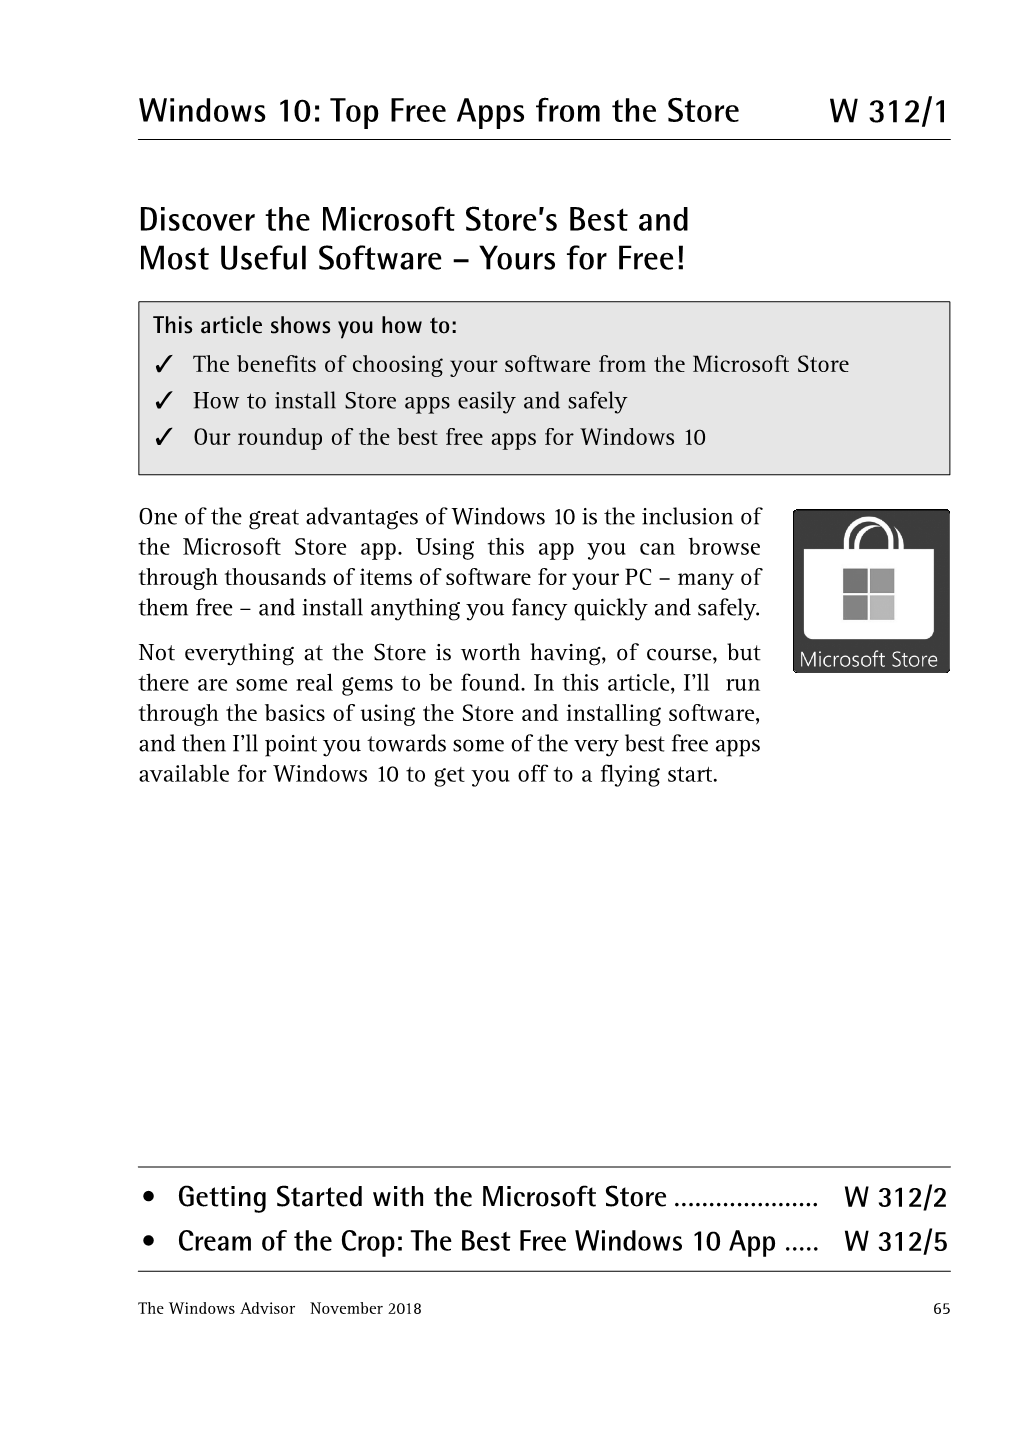 W 312/1 Windows 10: Top Free Apps from the St